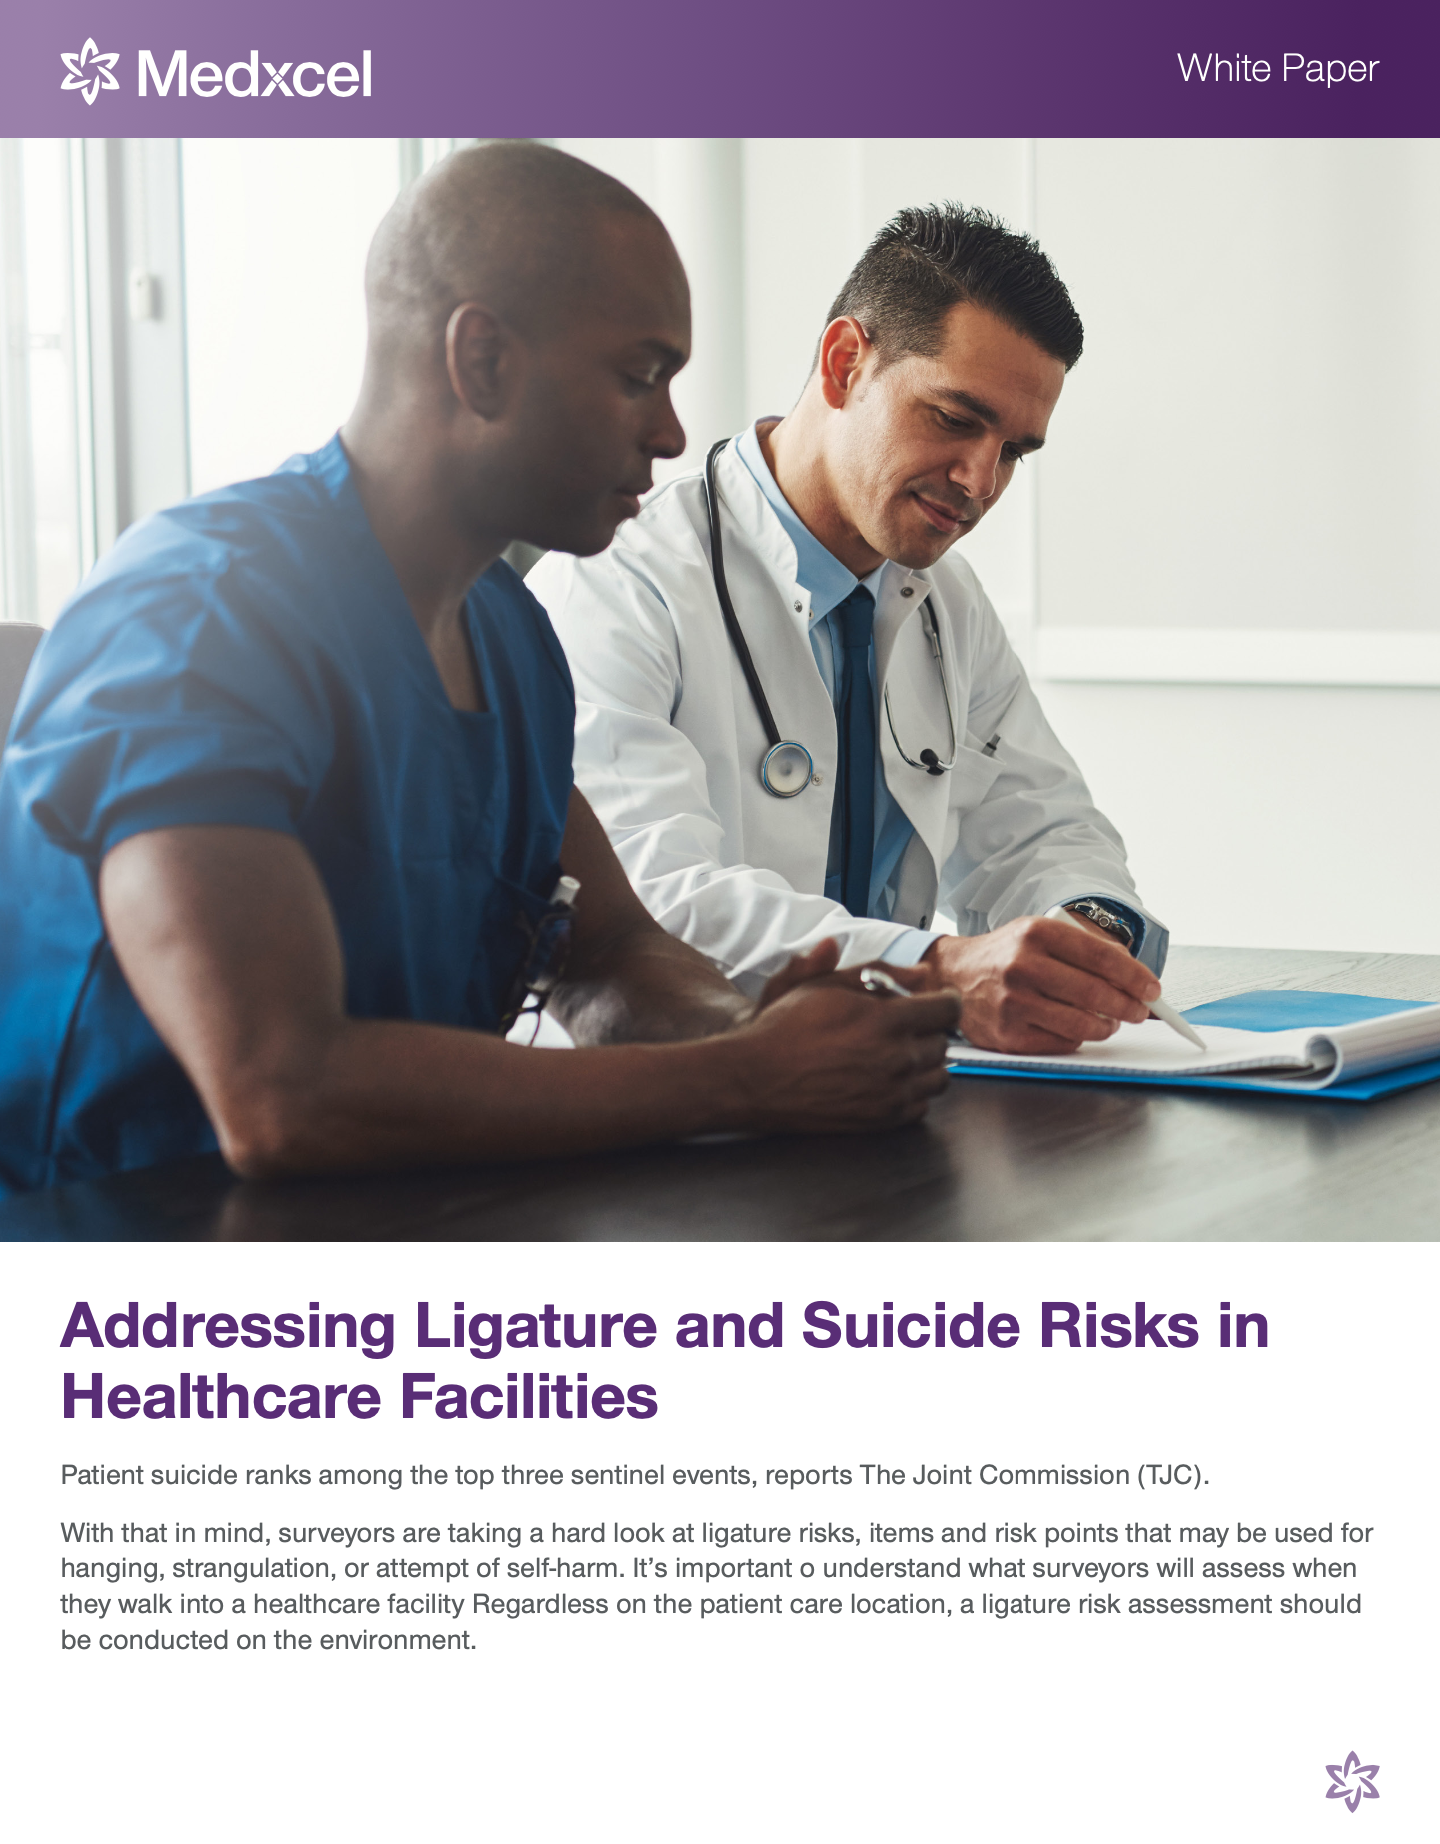 Download Addressing Ligature and Suicide Risks in Healthcare Facilities Whitepaper